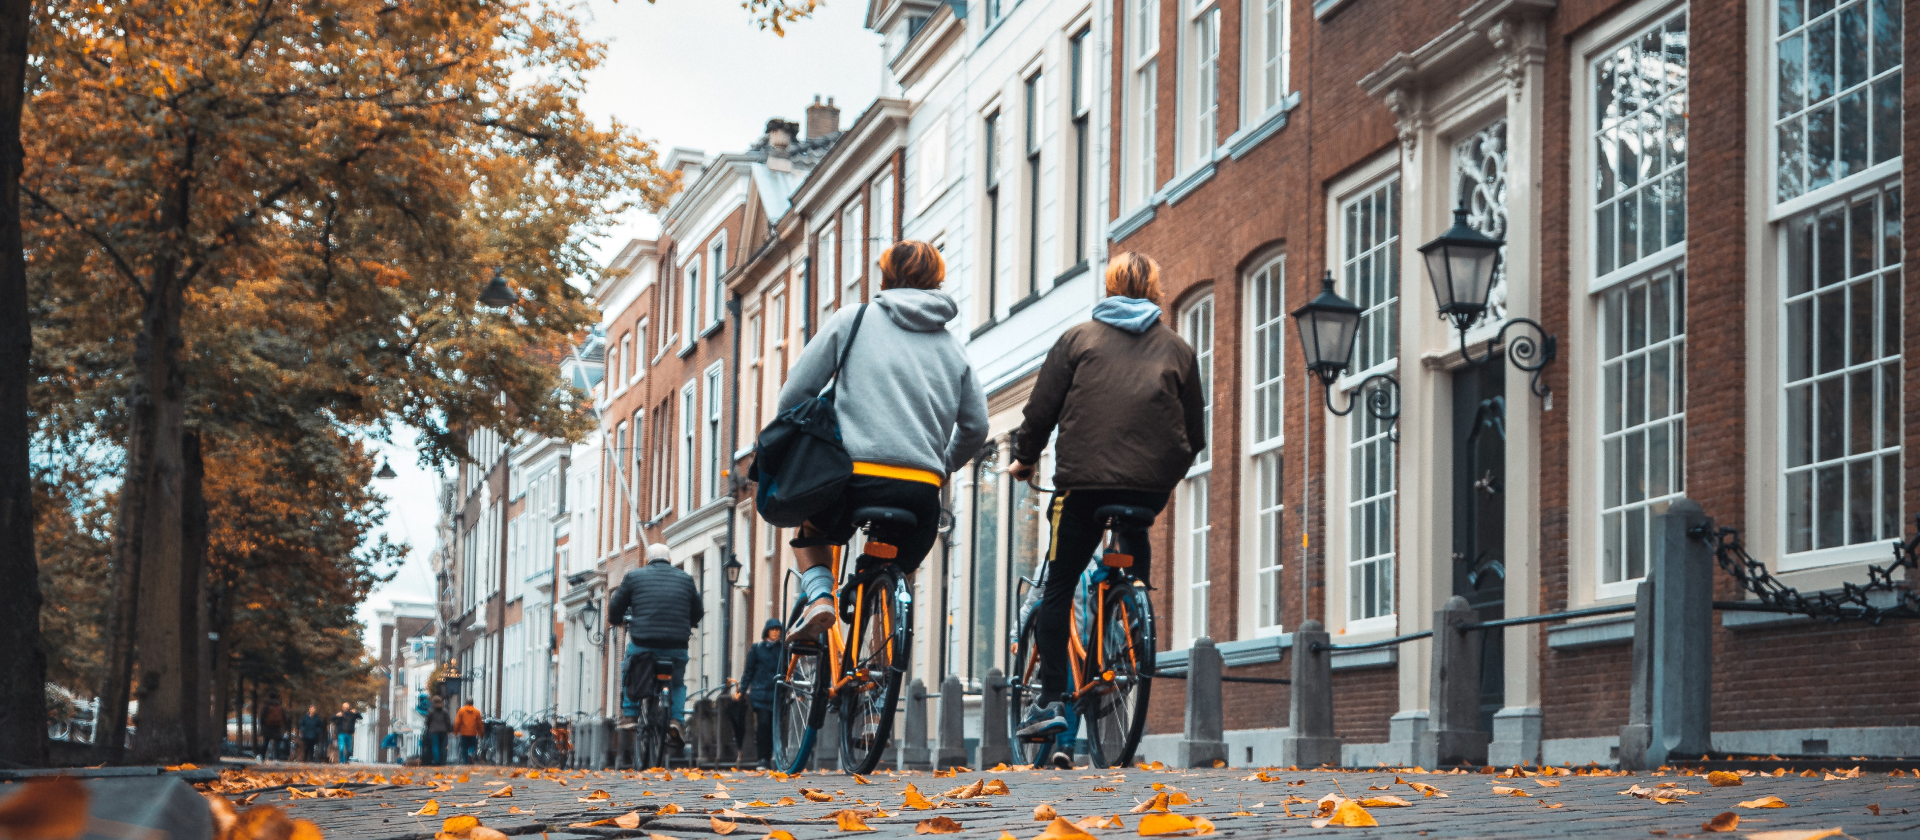 People biking on the streets of Delft